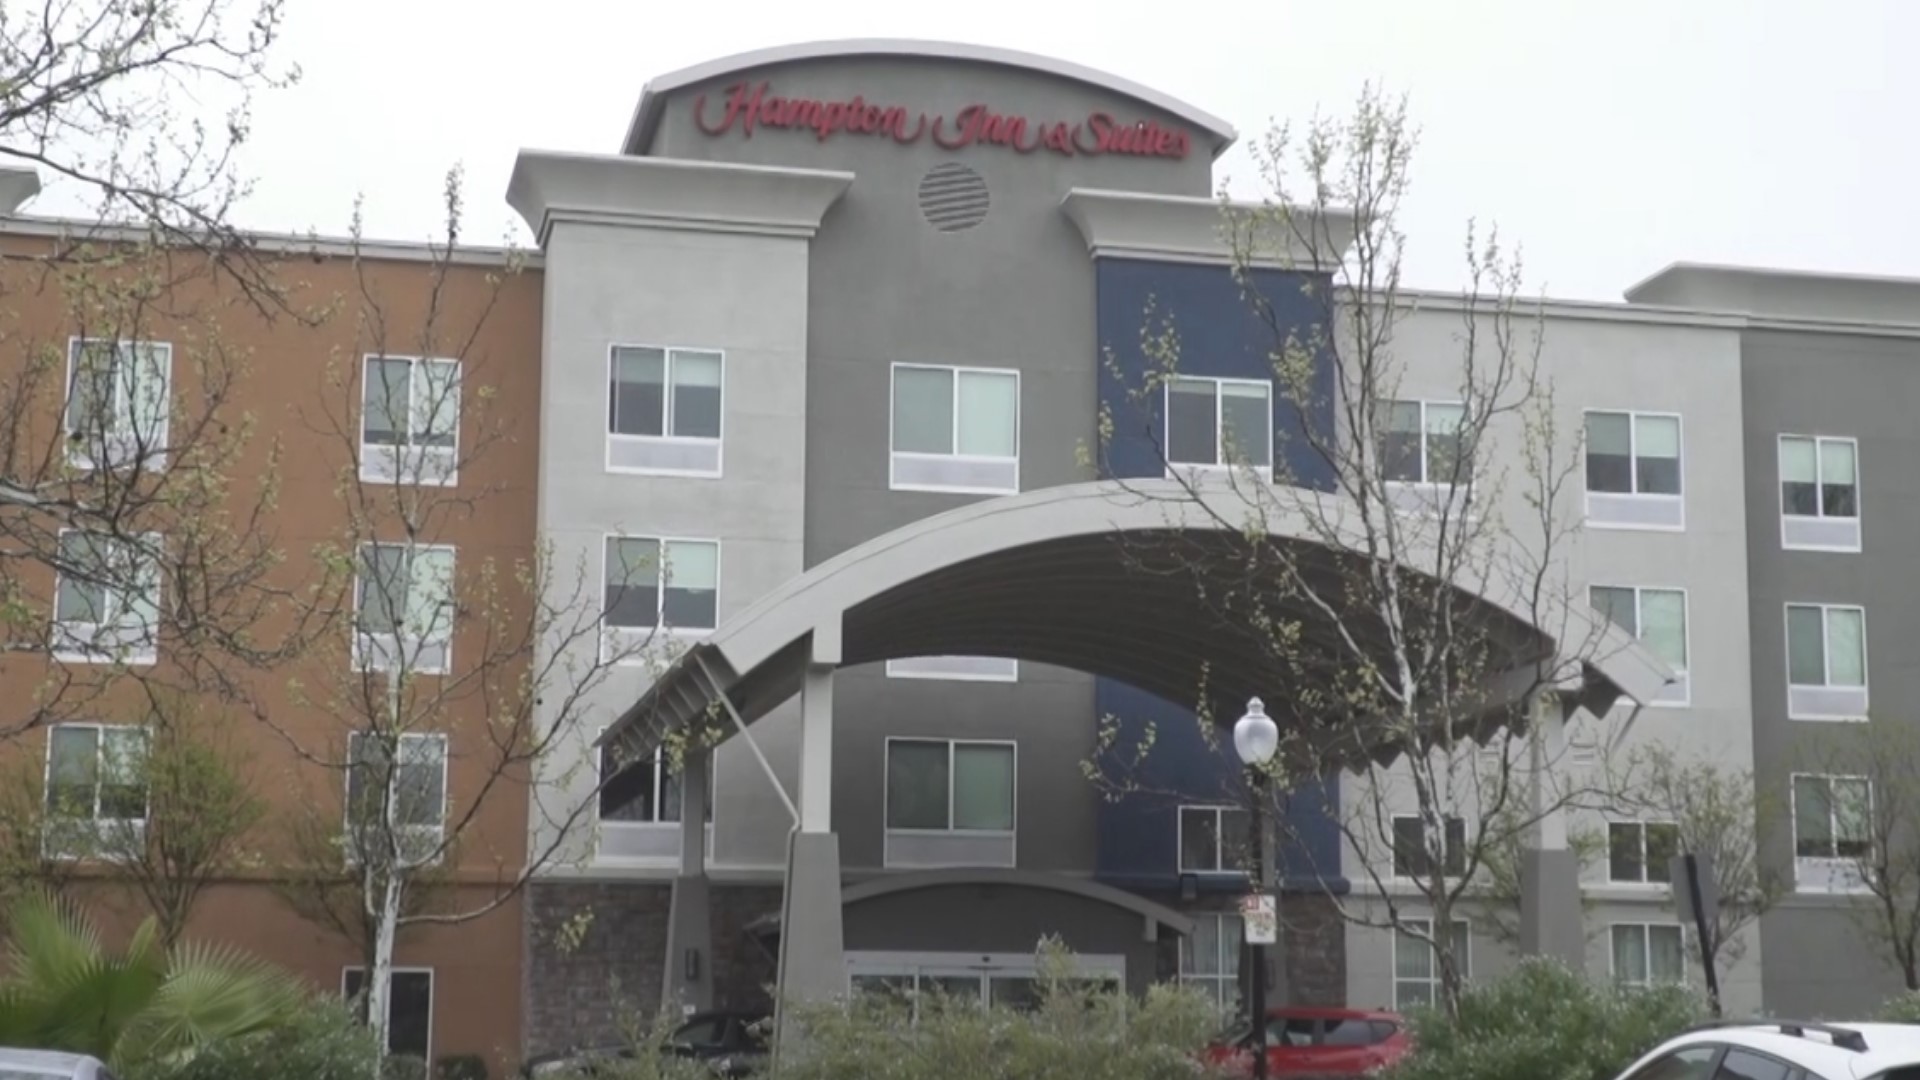 The Suisun City Police Department says they responded around 3:30 p.m. Friday to the Hampton Inn and Suites Suisun City Waterfront at 2 Harbor Center.